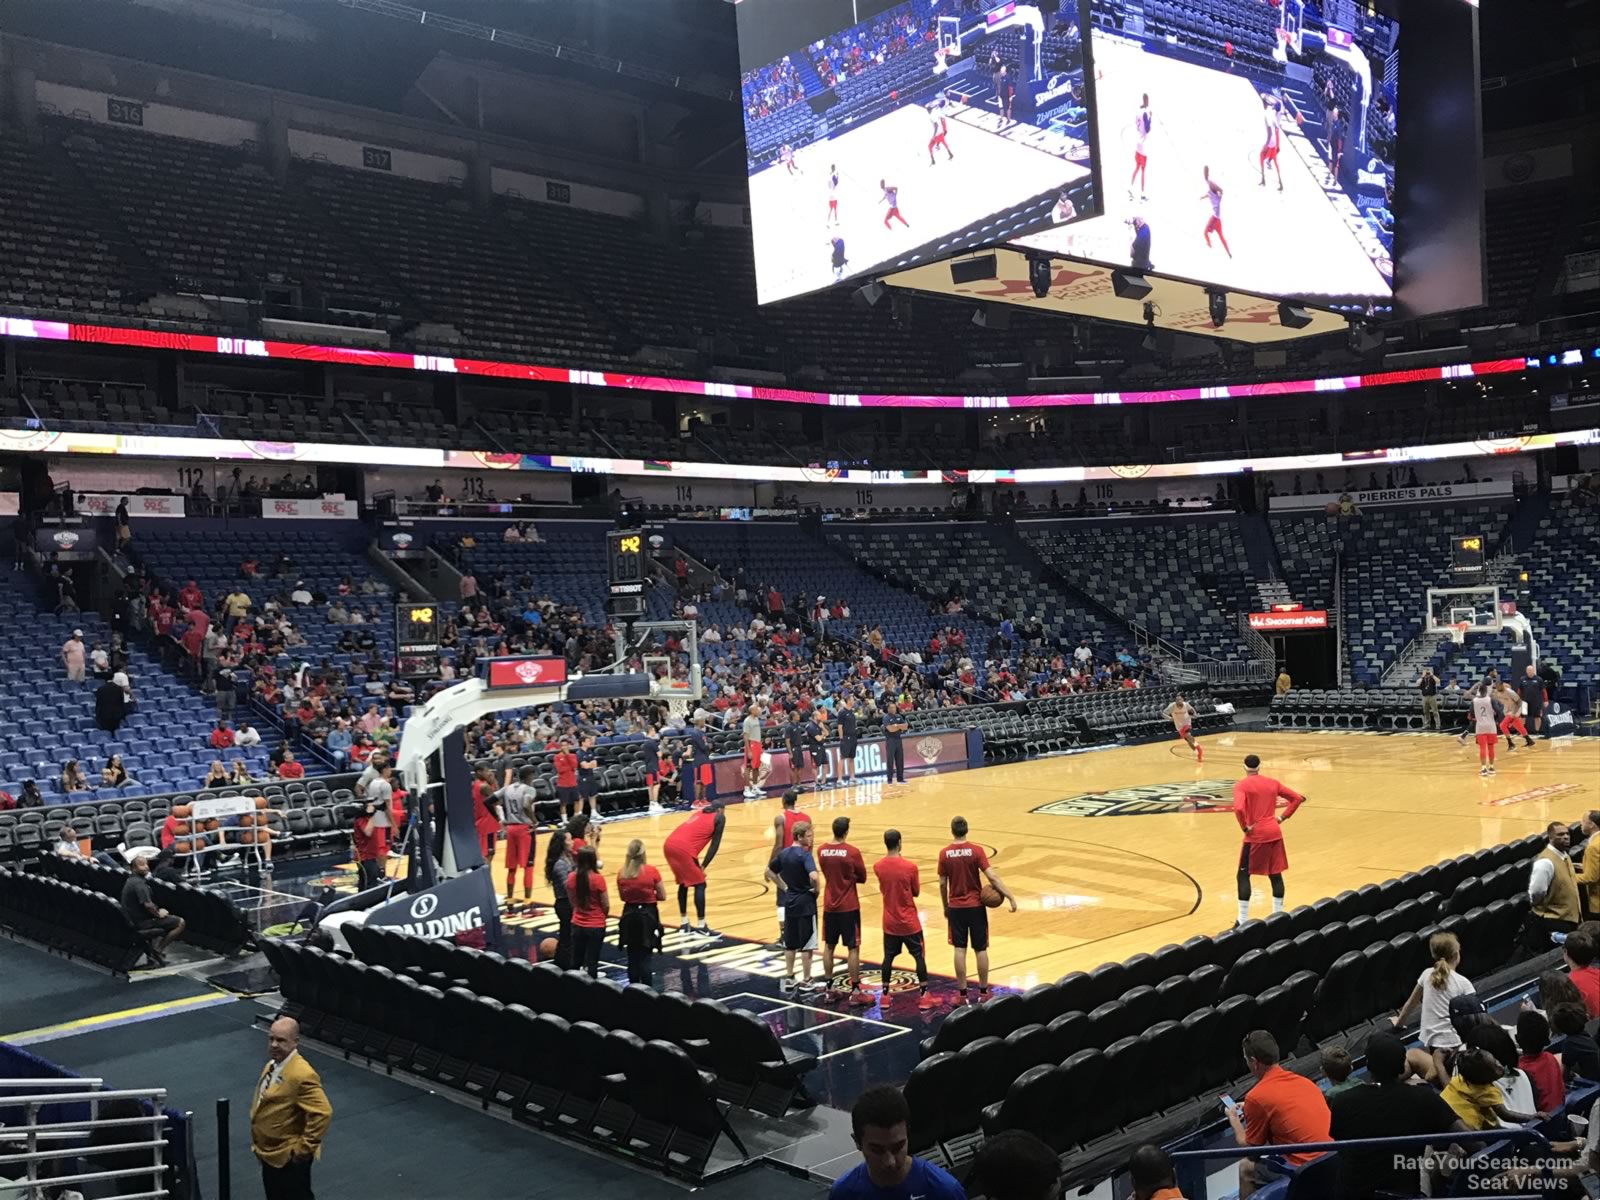 section 103, row 9 seat view  for basketball - smoothie king center